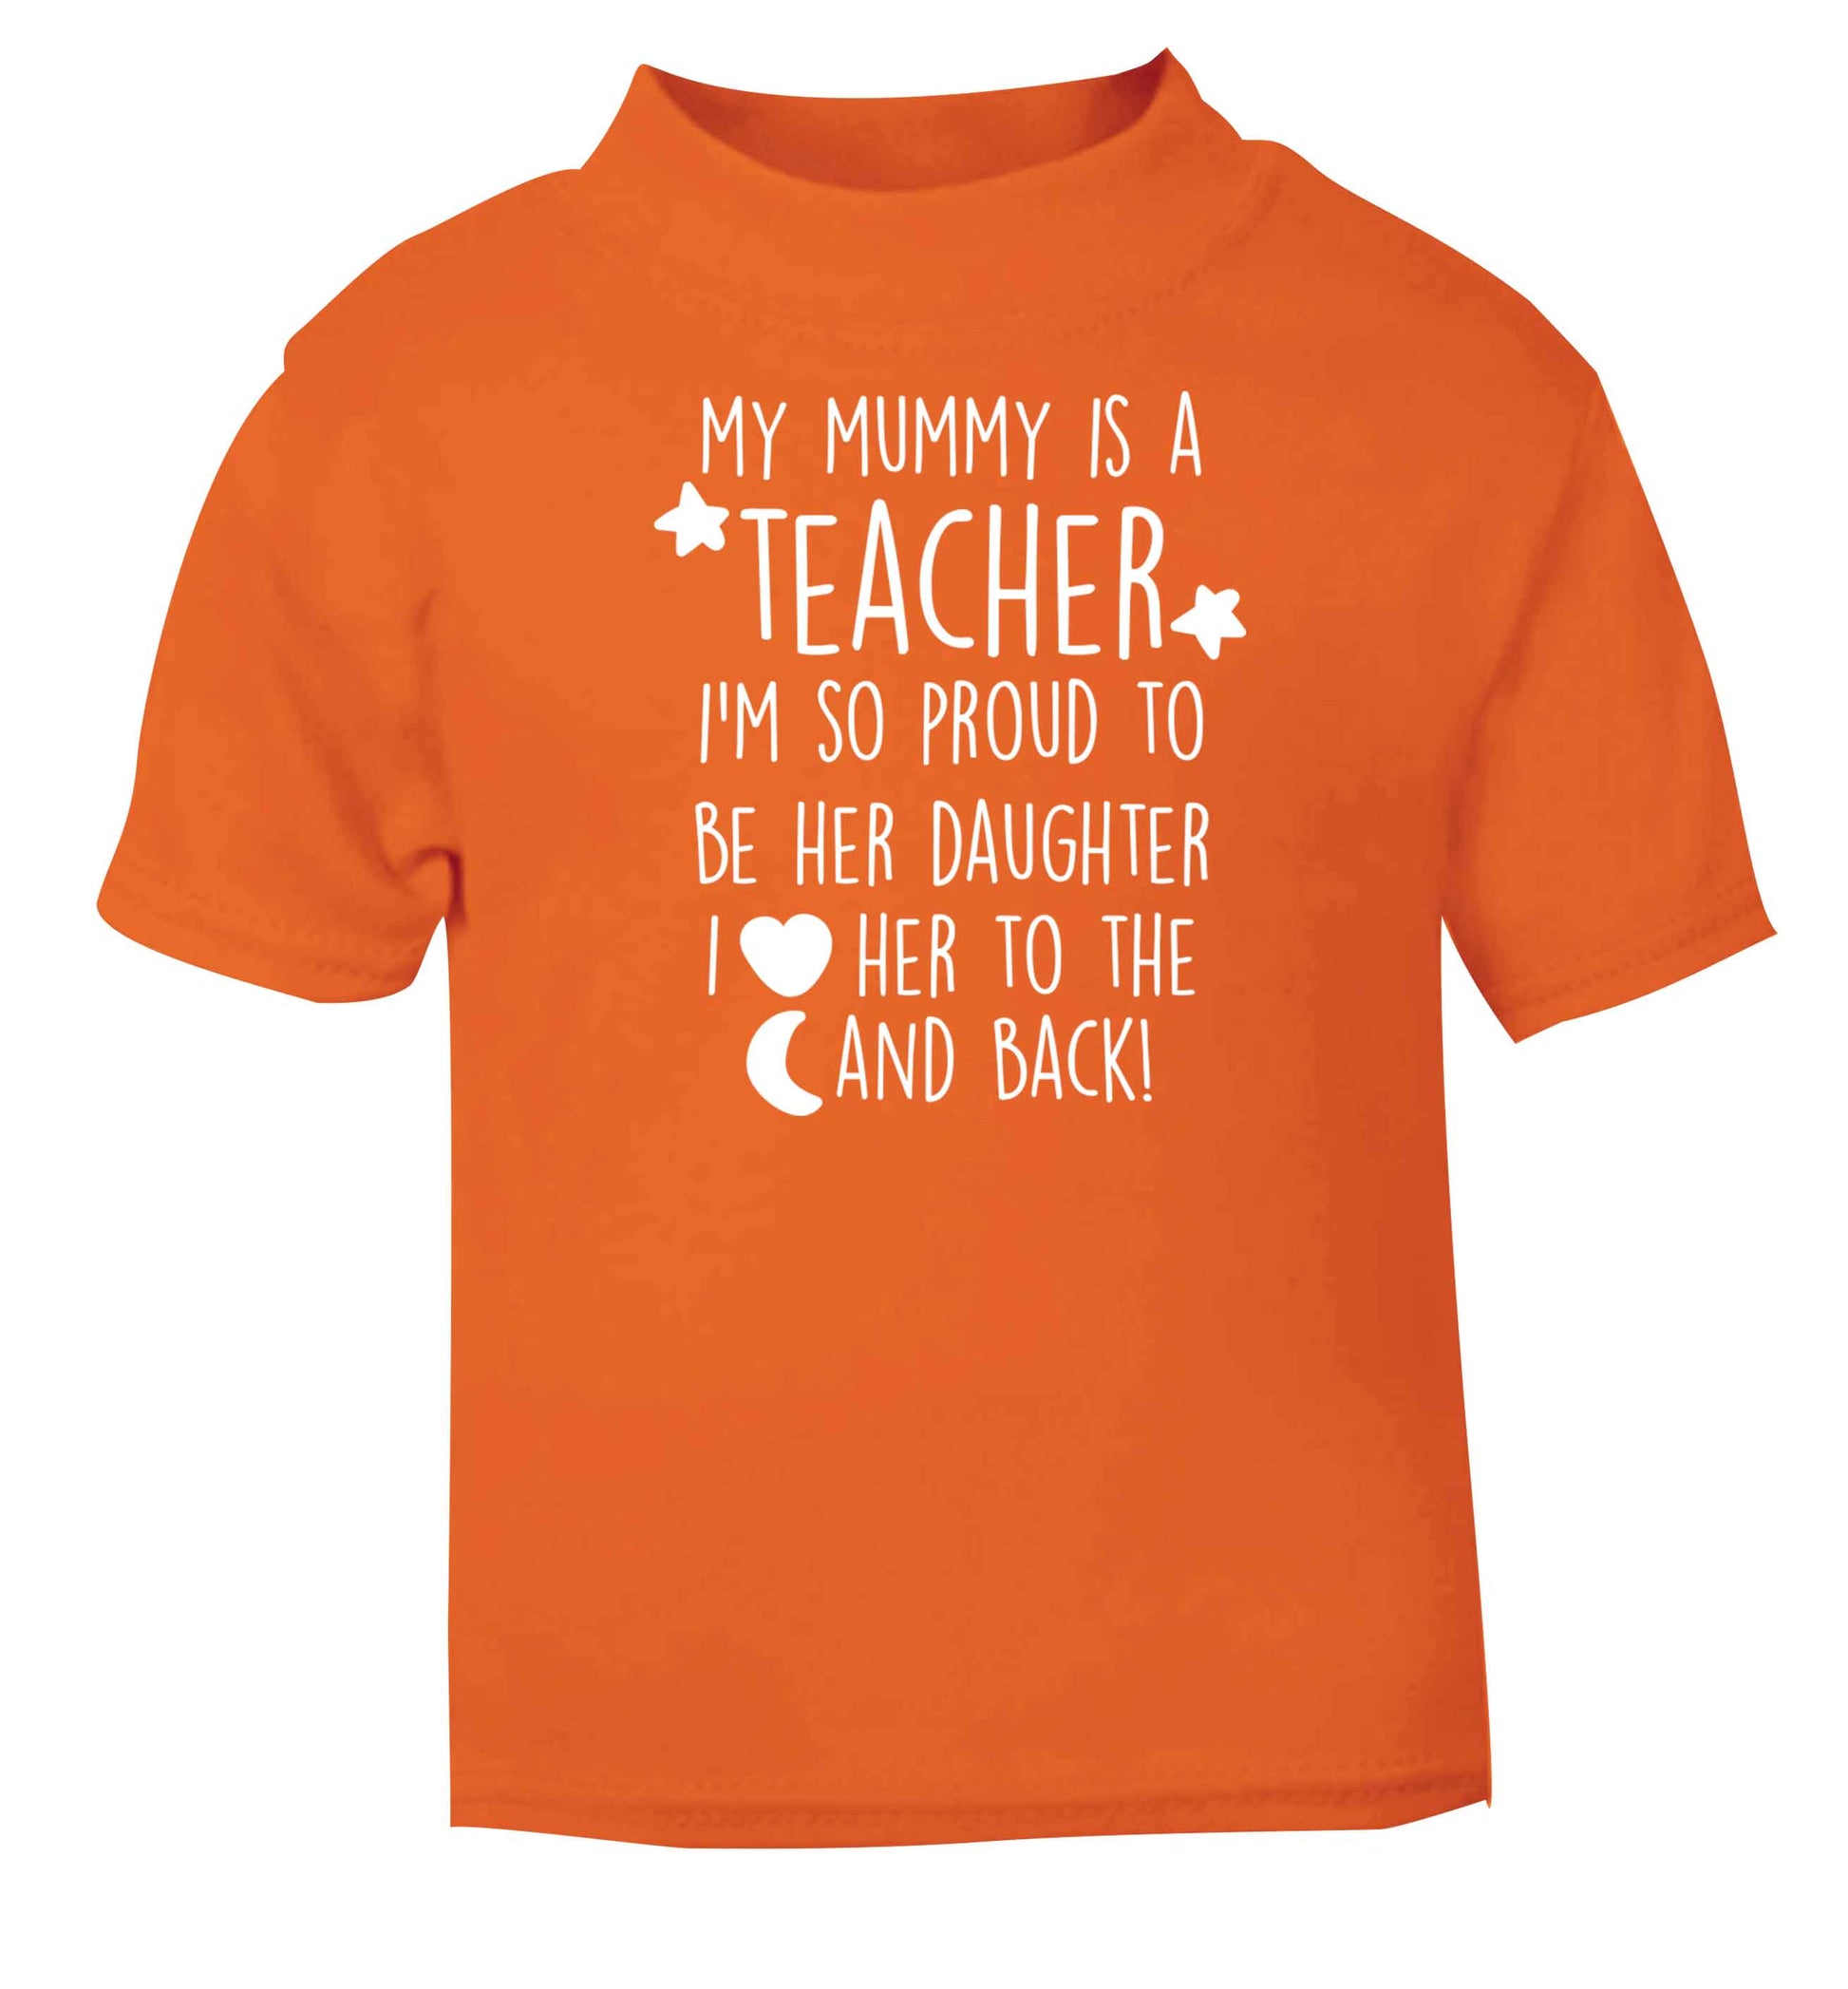 My mummy is a teacher I'm so proud to be her daughter I love her to the moon and back orange baby toddler Tshirt 2 Years